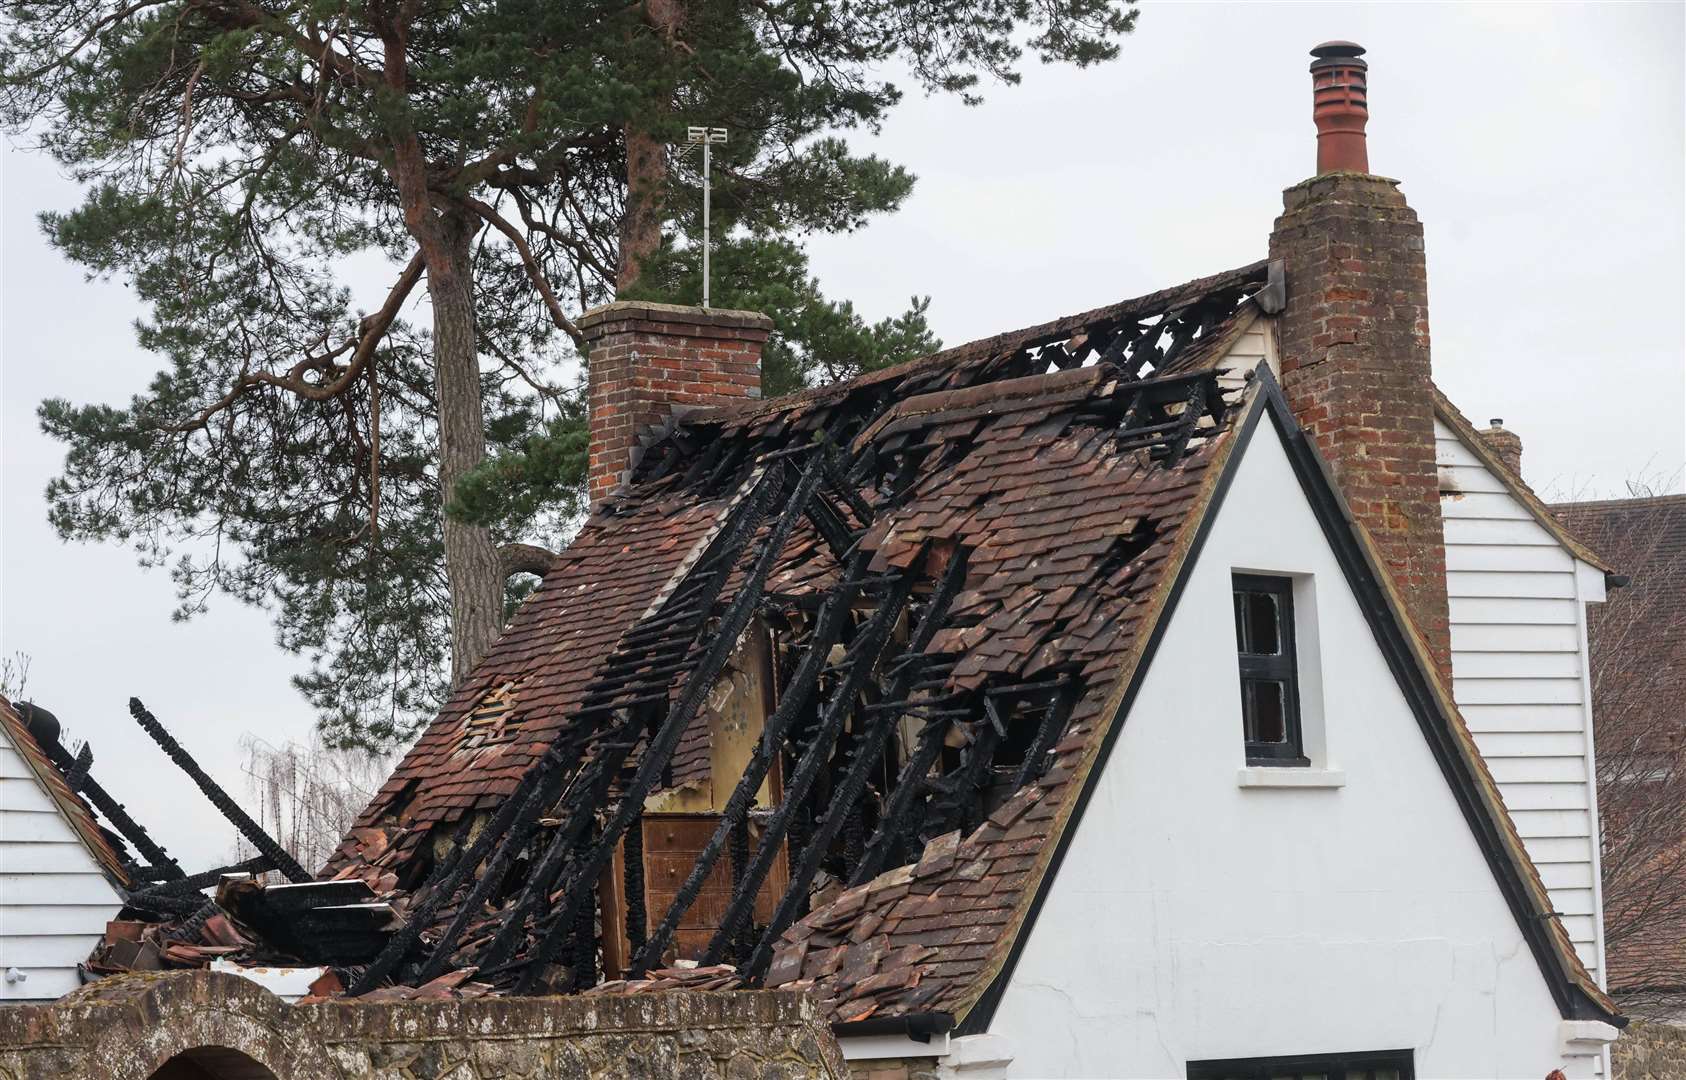 The damage caused by the fire in West Malling. Picture: UKNIP